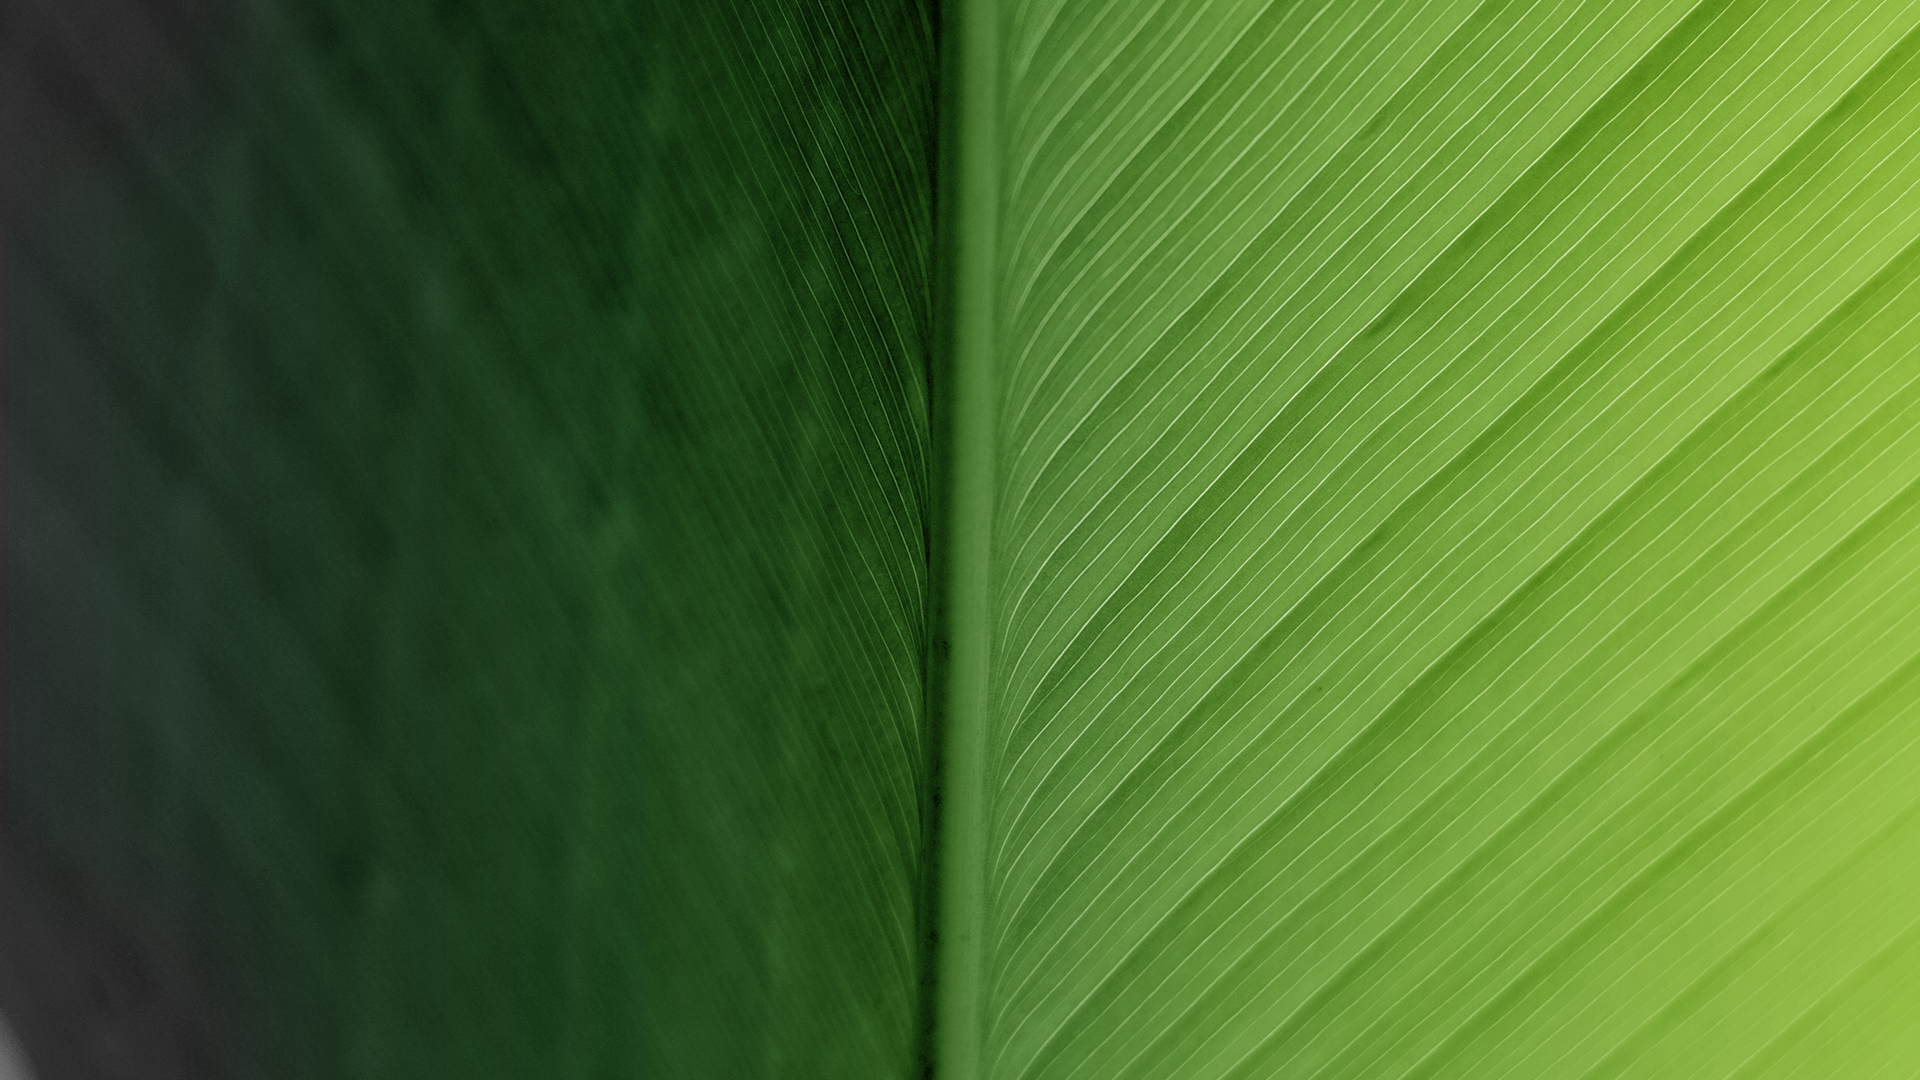 A vibrant green gradient background image, symbolizing Dismartek’s Technology and Design solutions from Colombia and LATAM, as innovative solutions from emerging markets. The gradient transitions from a deep, dark green on the left to a lighter, more vibrant green on the right. This abstract representation could evoke themes of growth, progression, and forward-thinking.